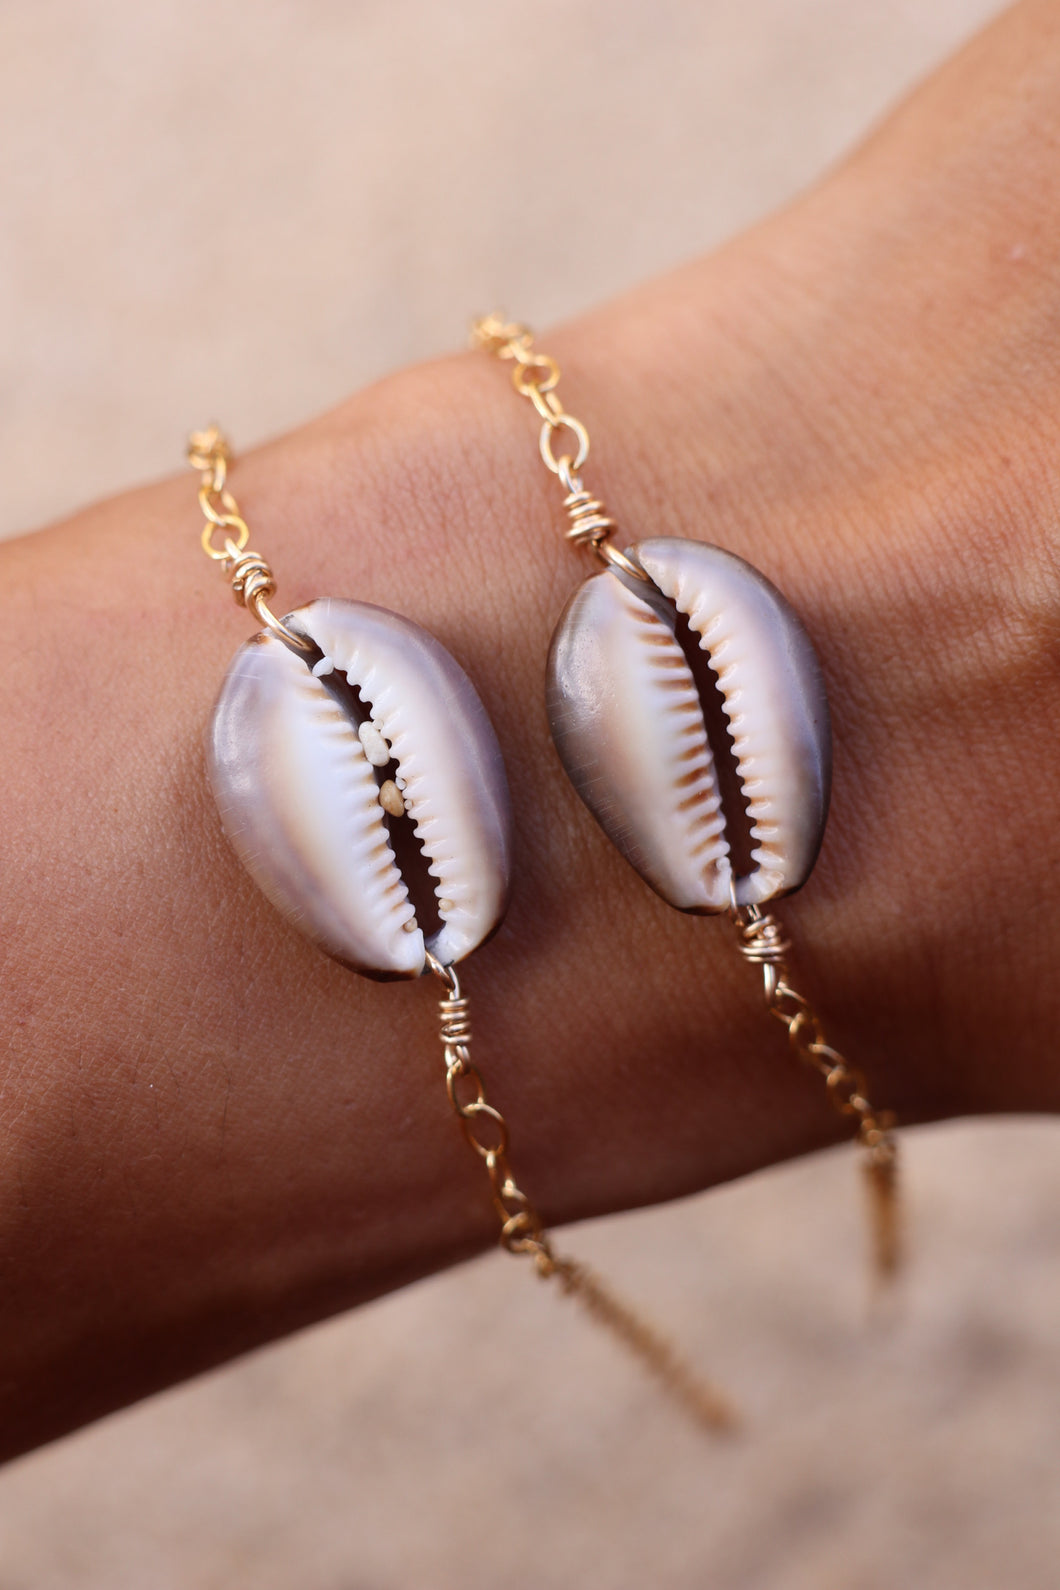 Black Beauty Natural Cowrie Beads Shell Bracelet Anklet Handmade Beach Shell  Wristband Evil Eyes Protection Bracelets Foot Jewelry Western Style  Adjustable for Women Men Girls Boys (cb6) : Amazon.in: Jewellery